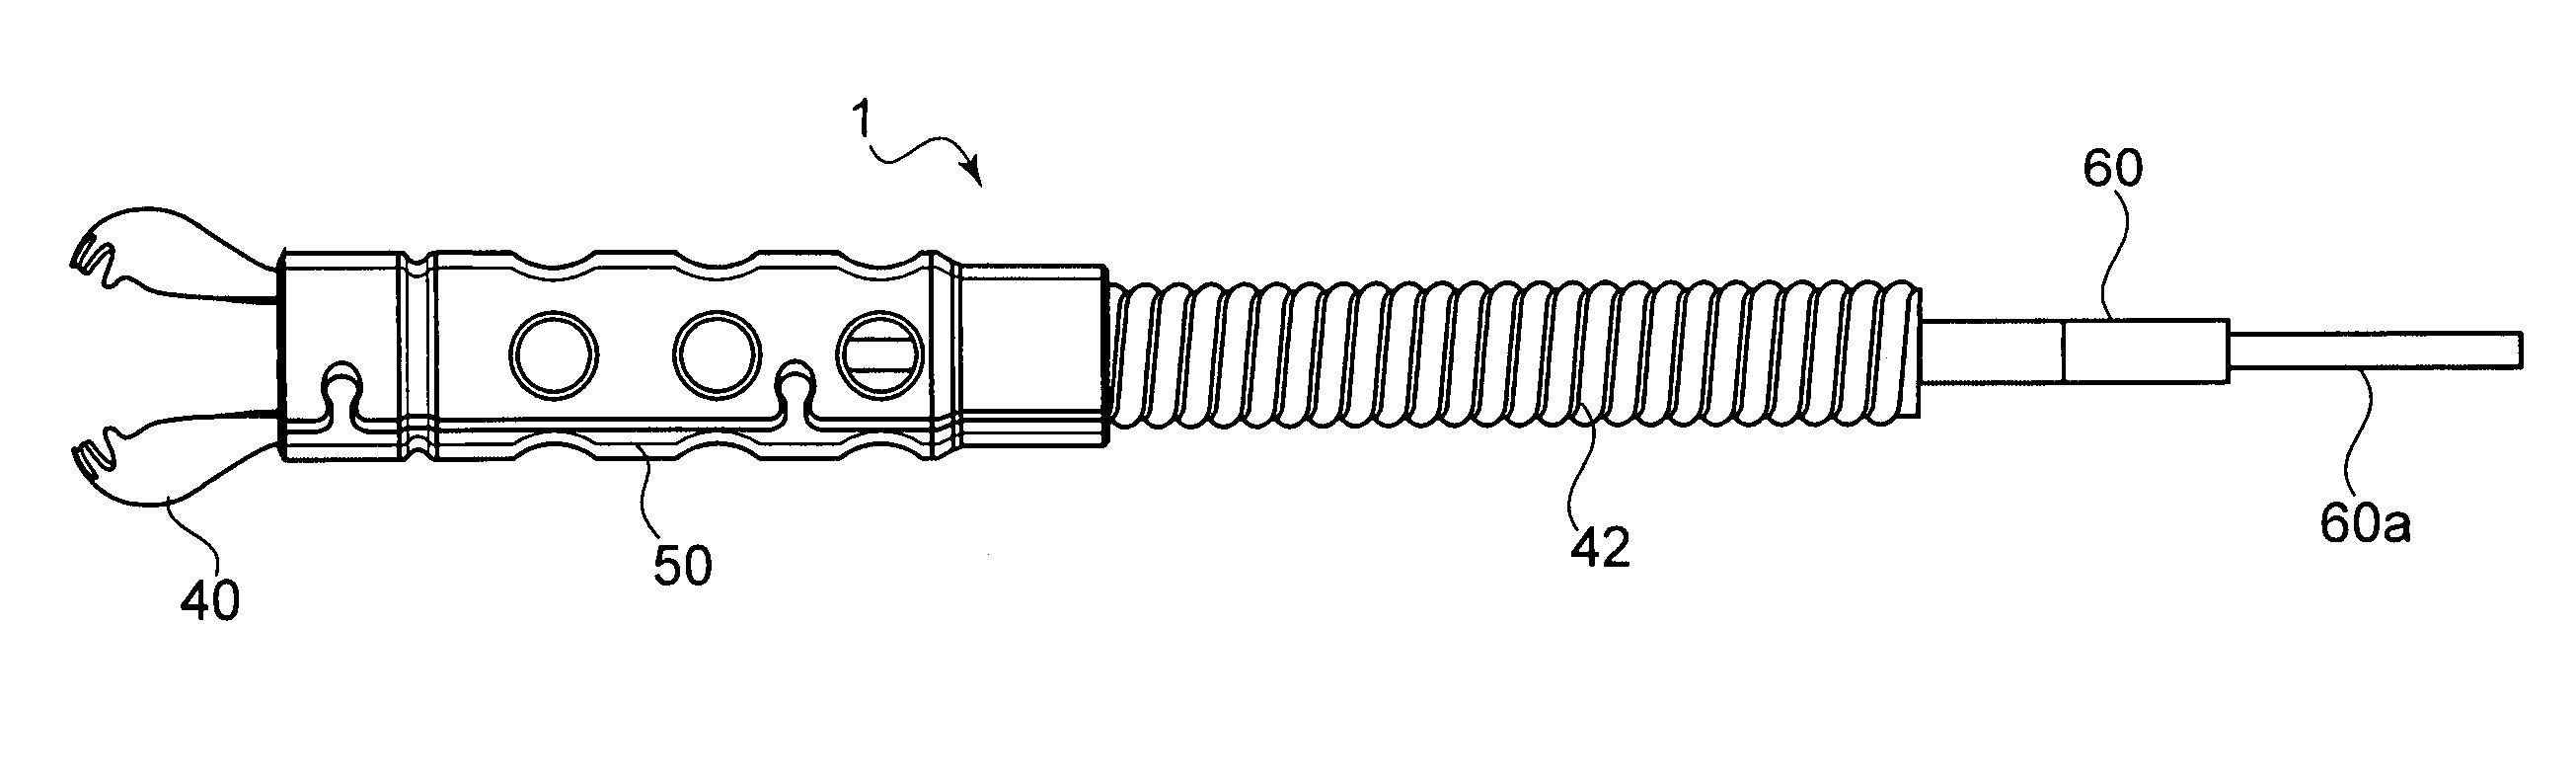 Automated actuator for spring based multiple purpose medical instruments